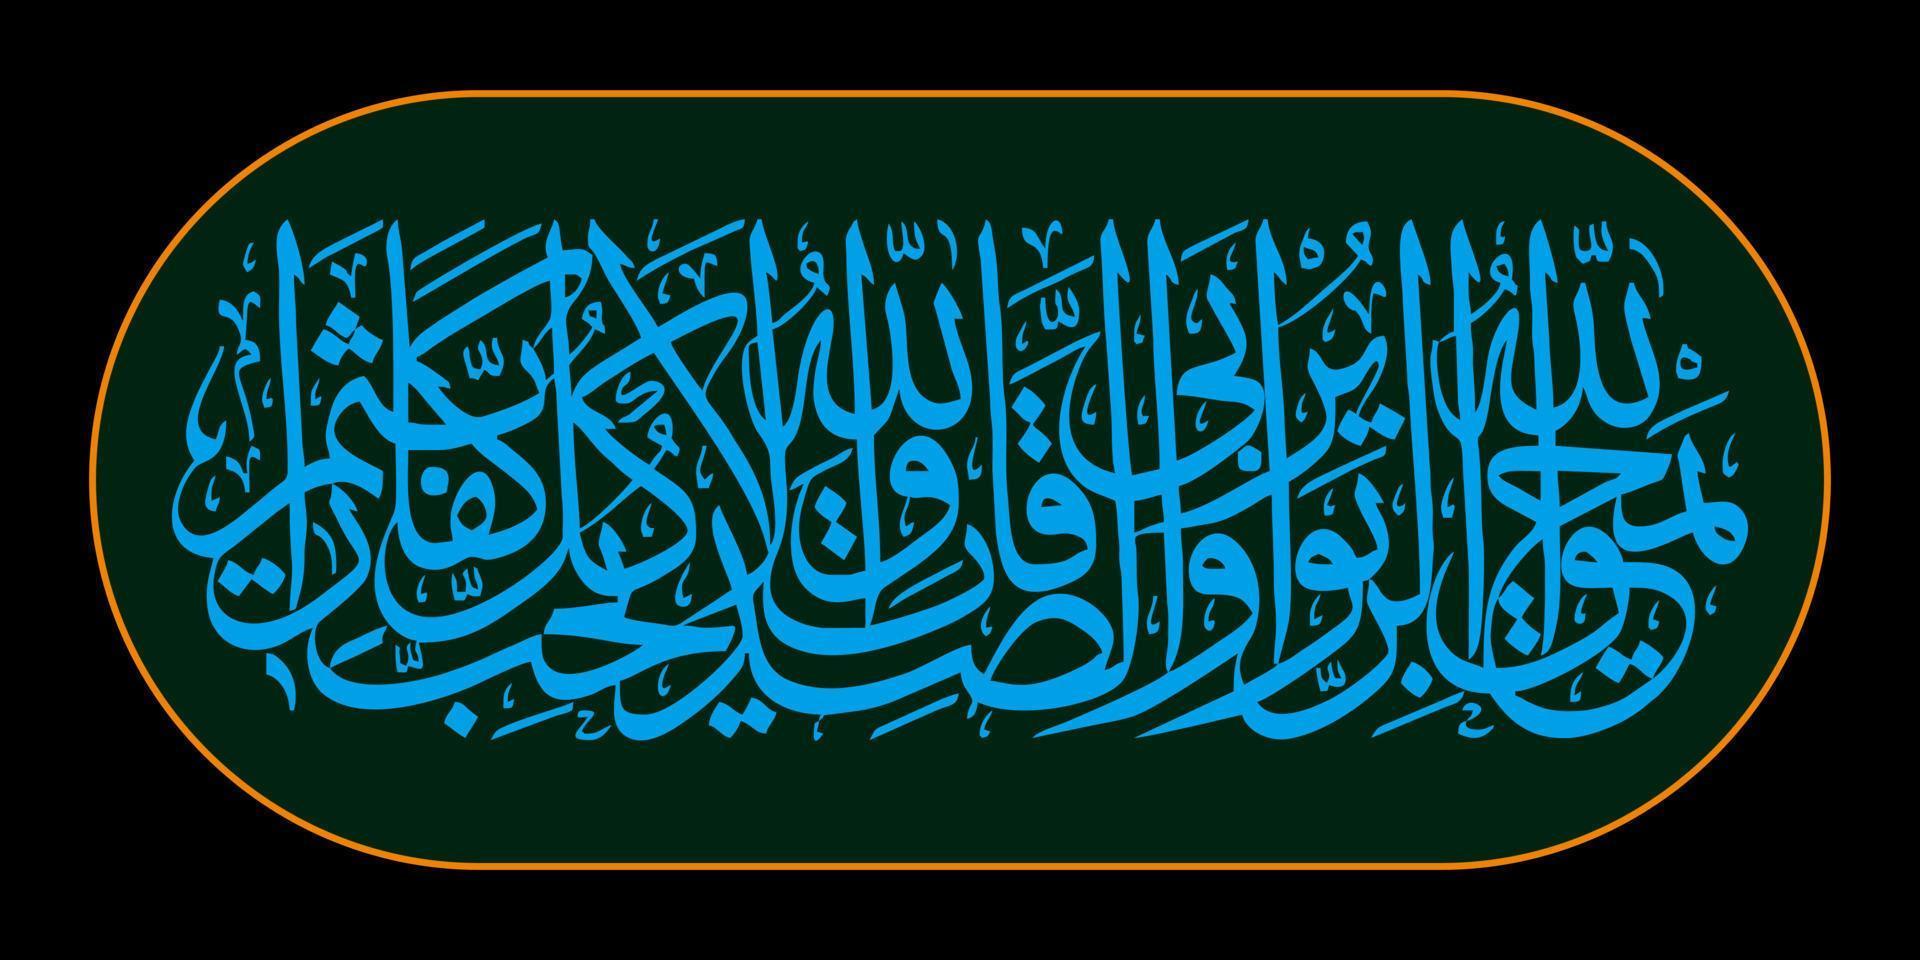 Arabic Calligraphy Quran Surah Al Baqarah Verse 276, translation Allah destroys usury and nourishes alms. Allah does not like everyone who remains in disbelief and wallows in sin. vector